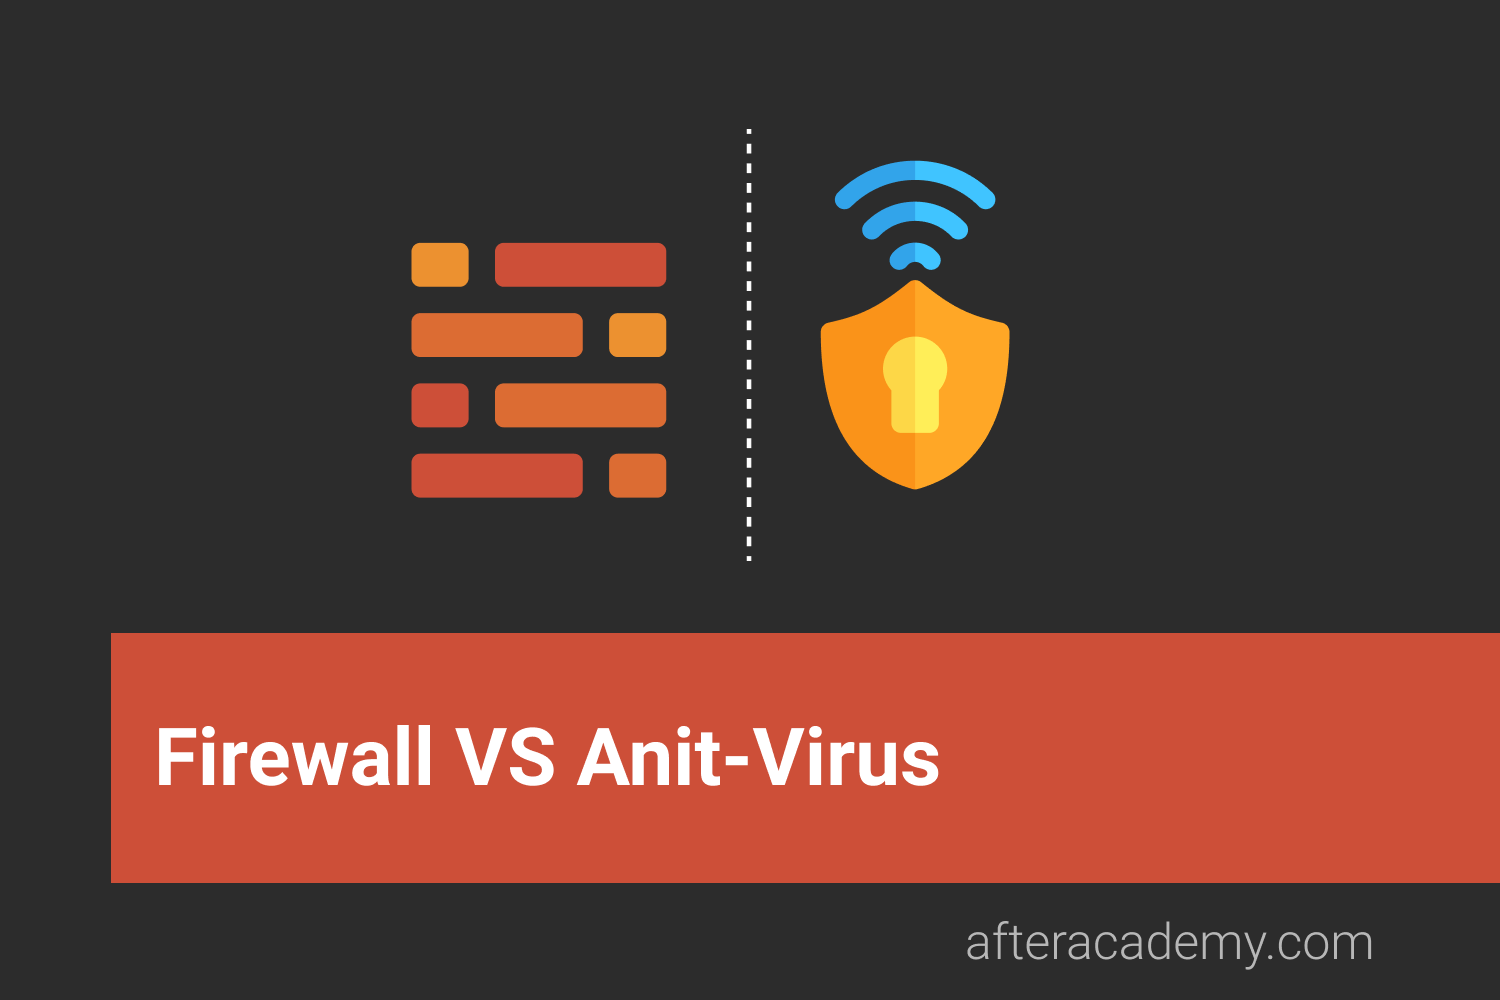 Difference between a Firewall and Antivirus